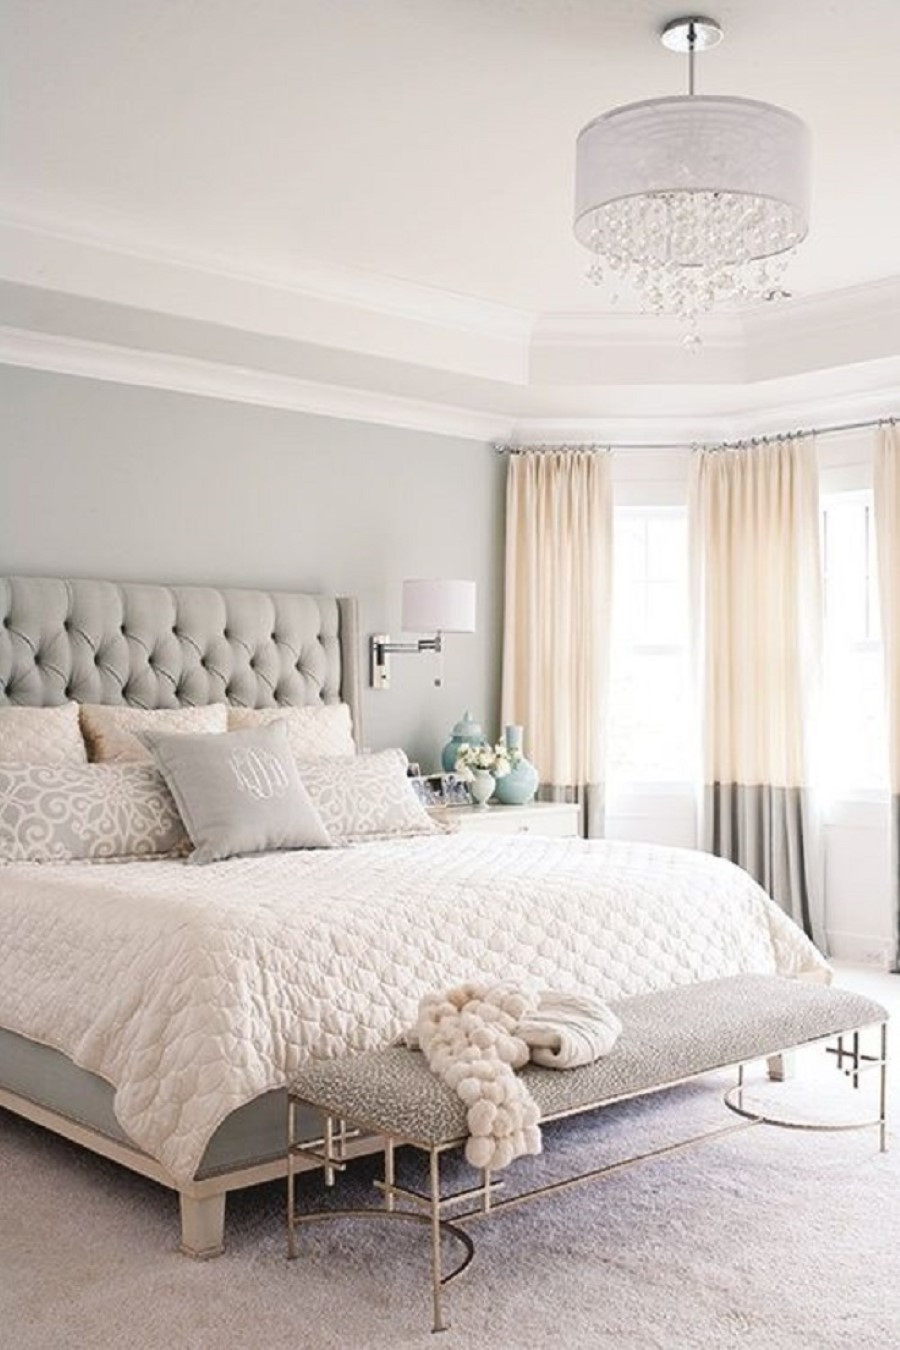 Grey Paint Colors For Bedroom
 Best Paint Colors for Small Room – Some Tips